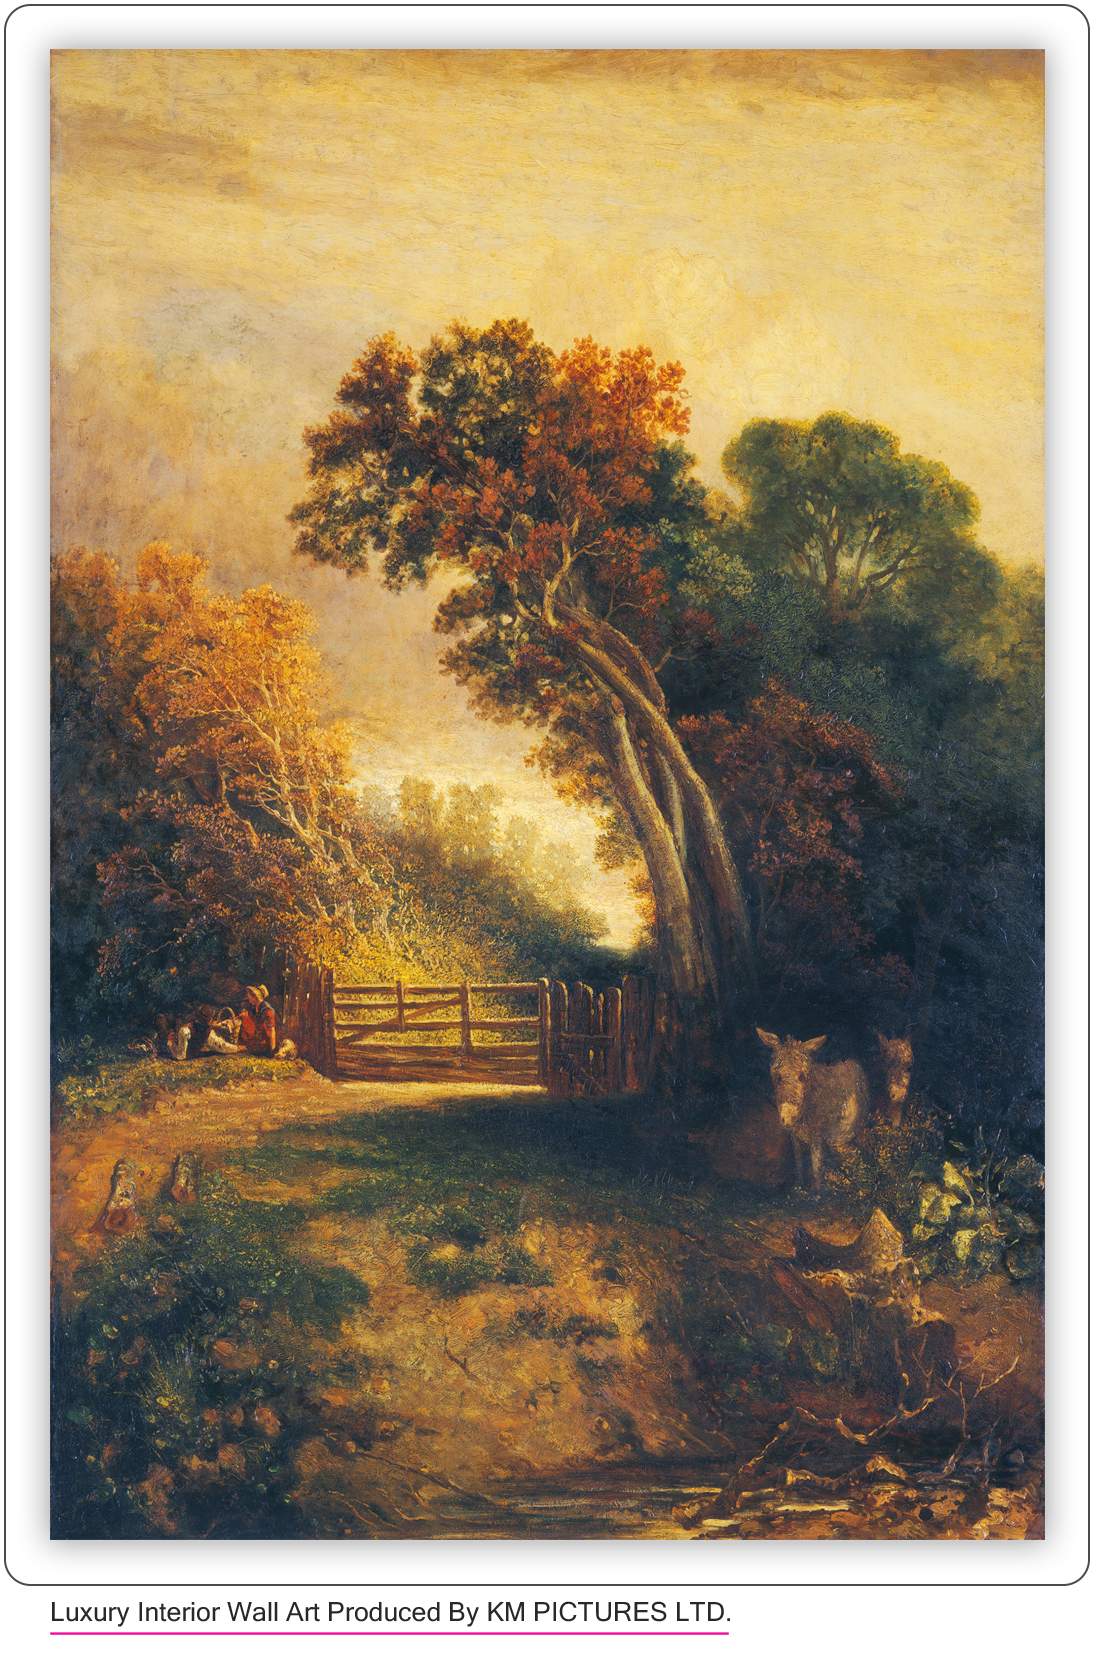 Landscape with Picnickers and Donkeys by a Gate, c. 1830-1880